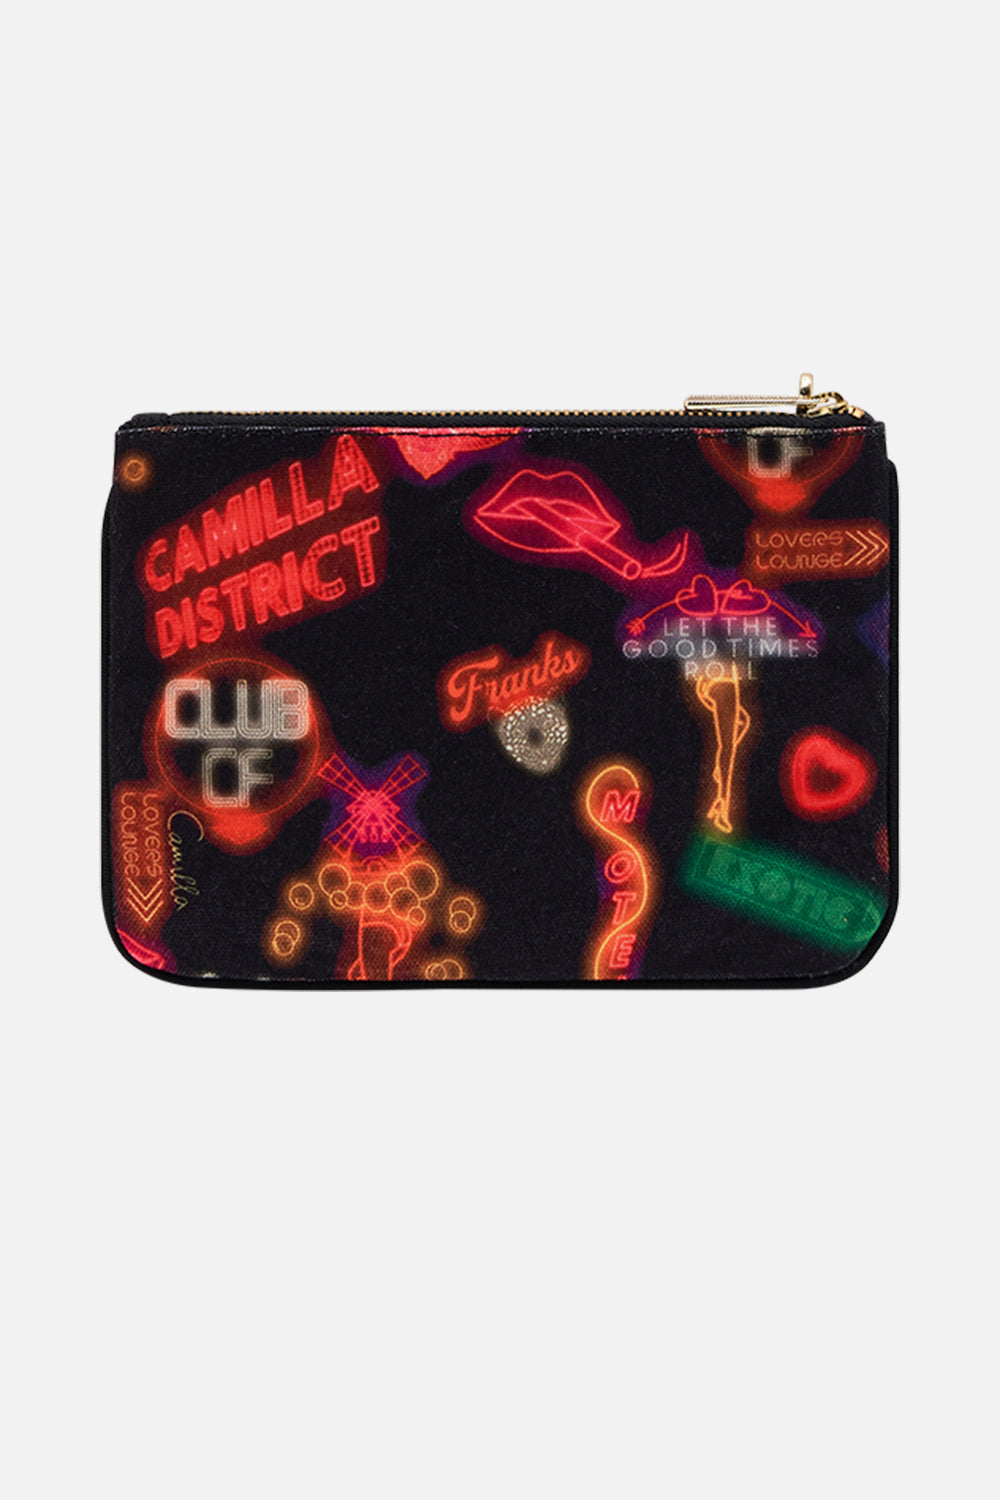 CAMILLA multi coin and phone purse in Electric Loveland